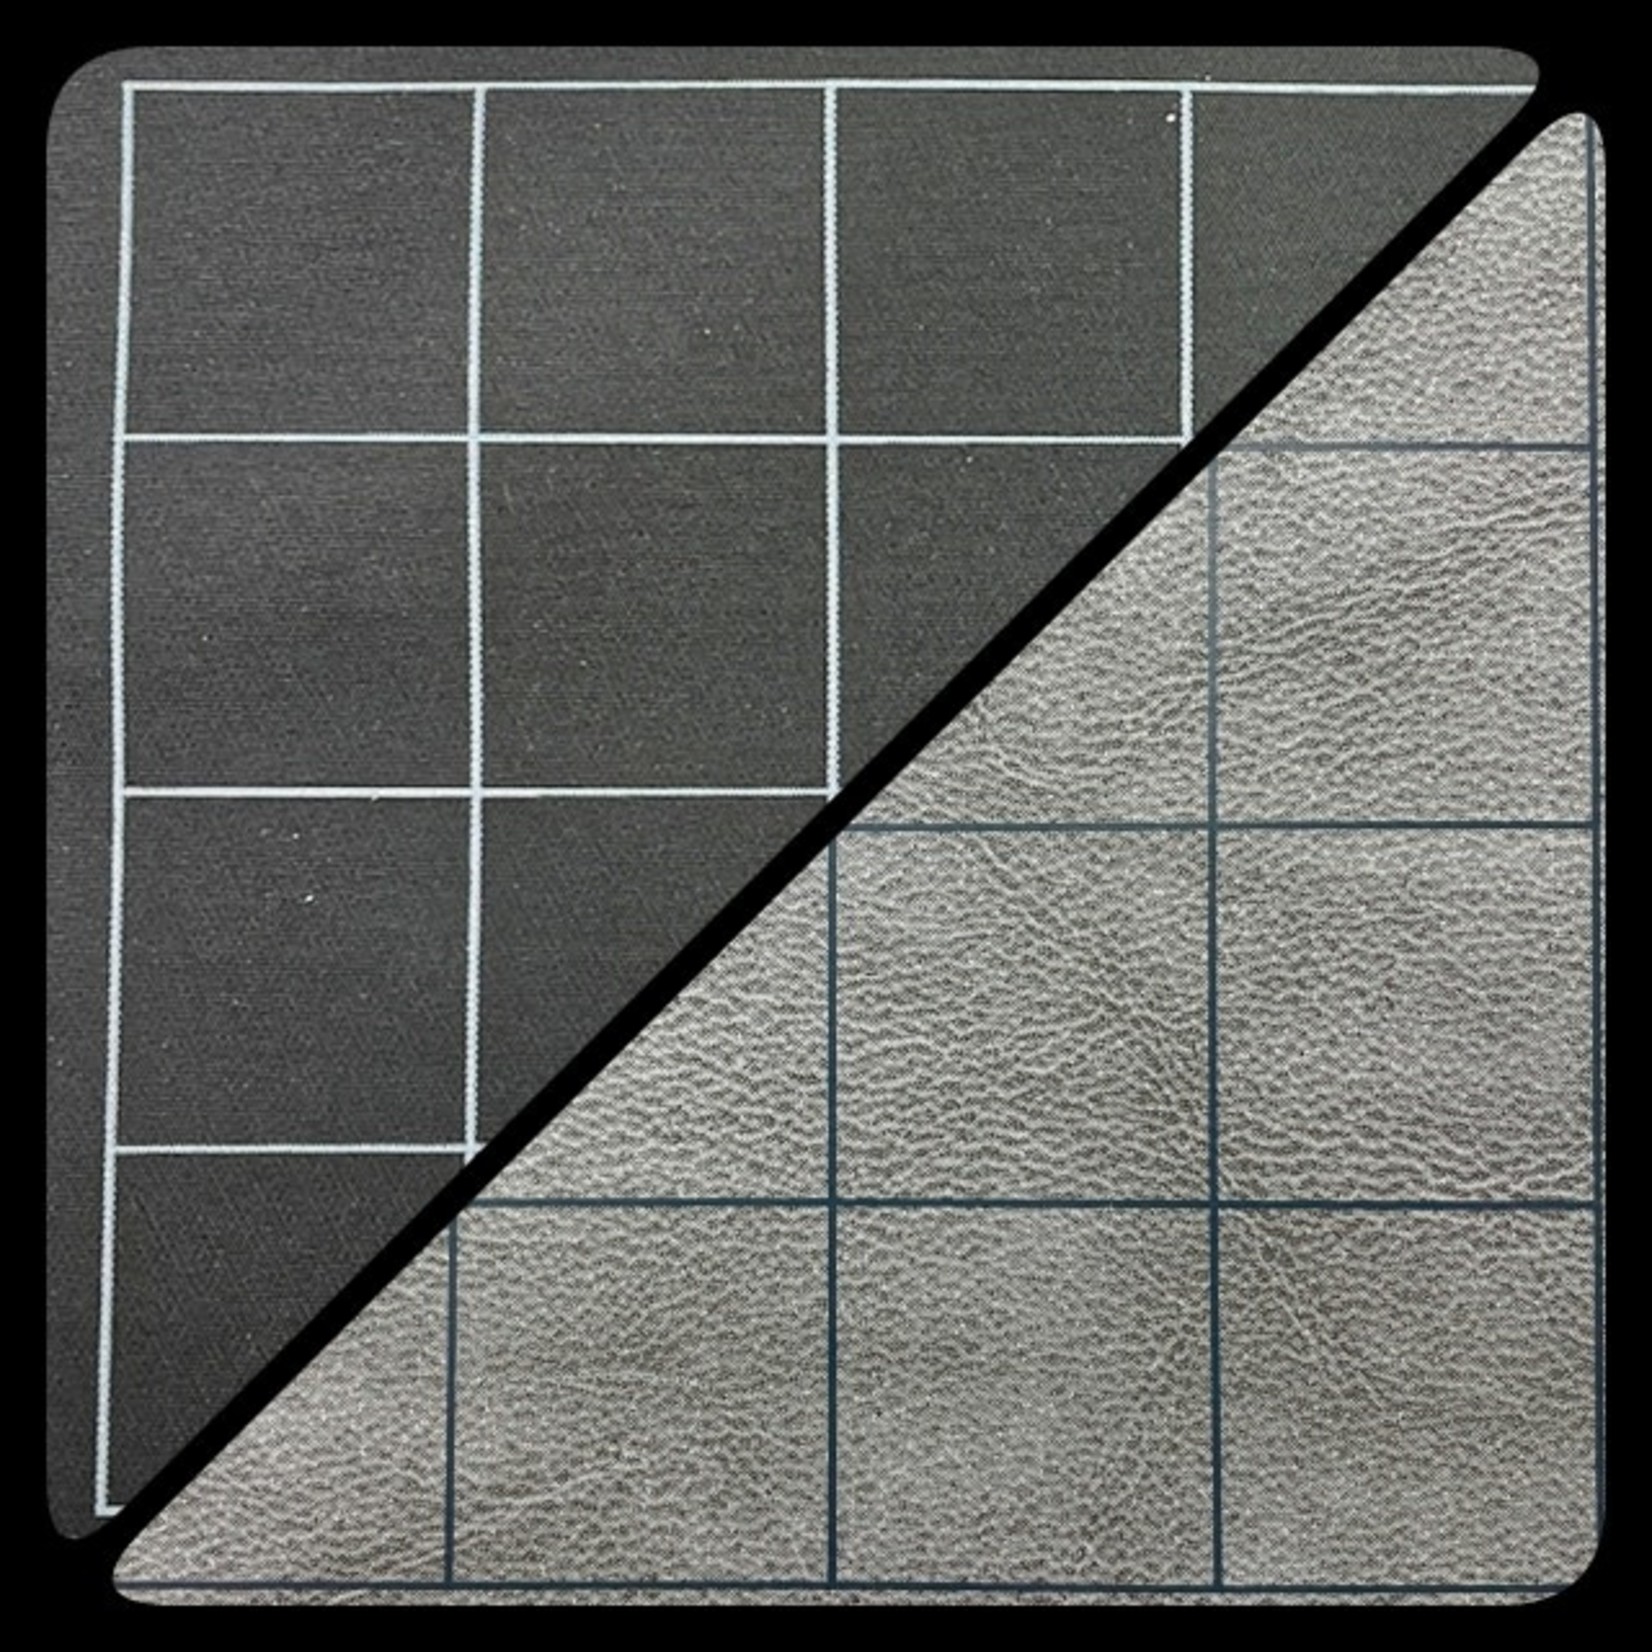 Chessex Battle Mat 96480 Small Square 26x 23.5 inch Reversible Black Grey